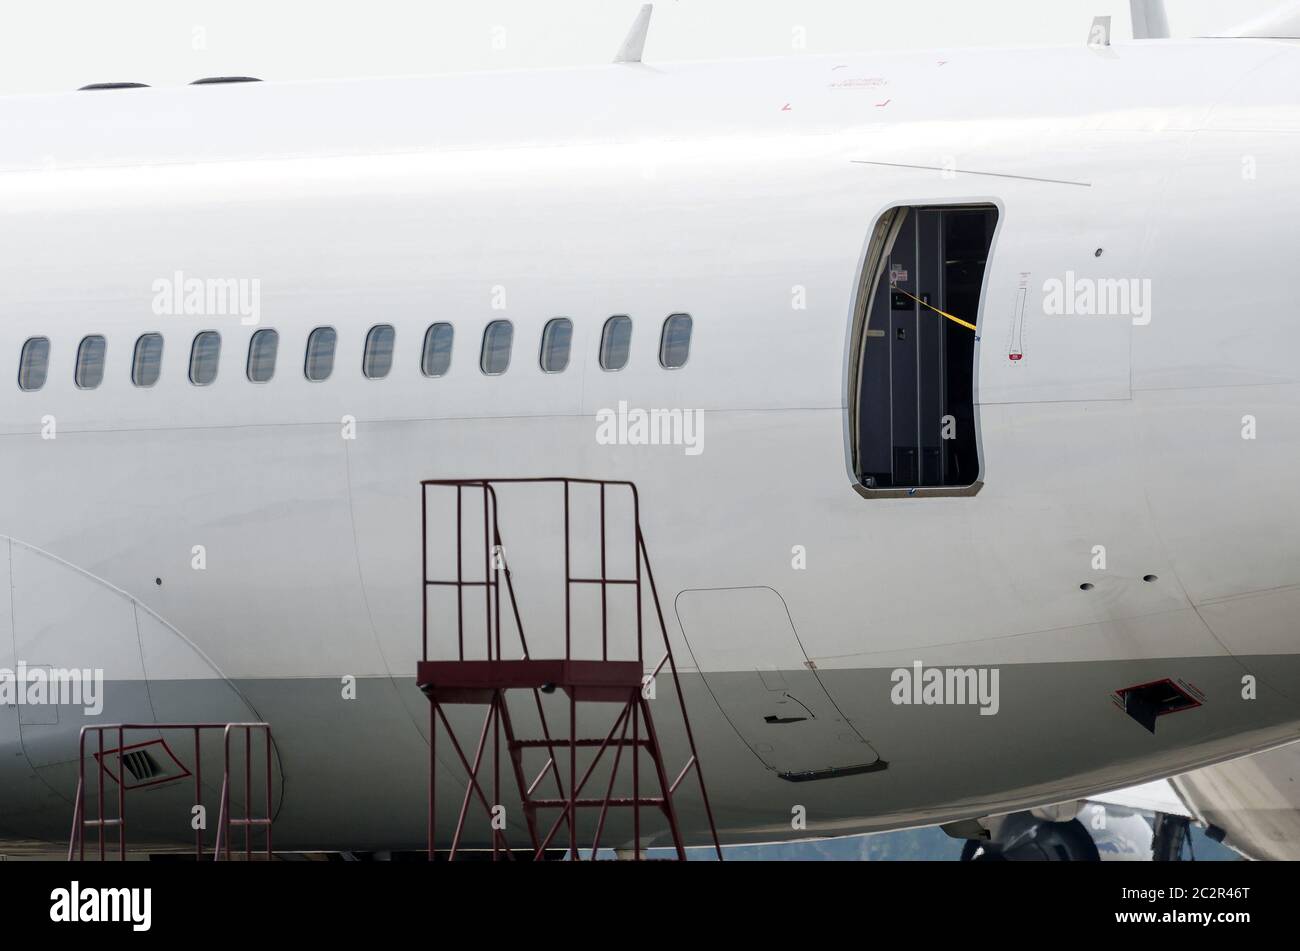 Portholes and an open door to a passenger plane, on service after the flight Stock Photo